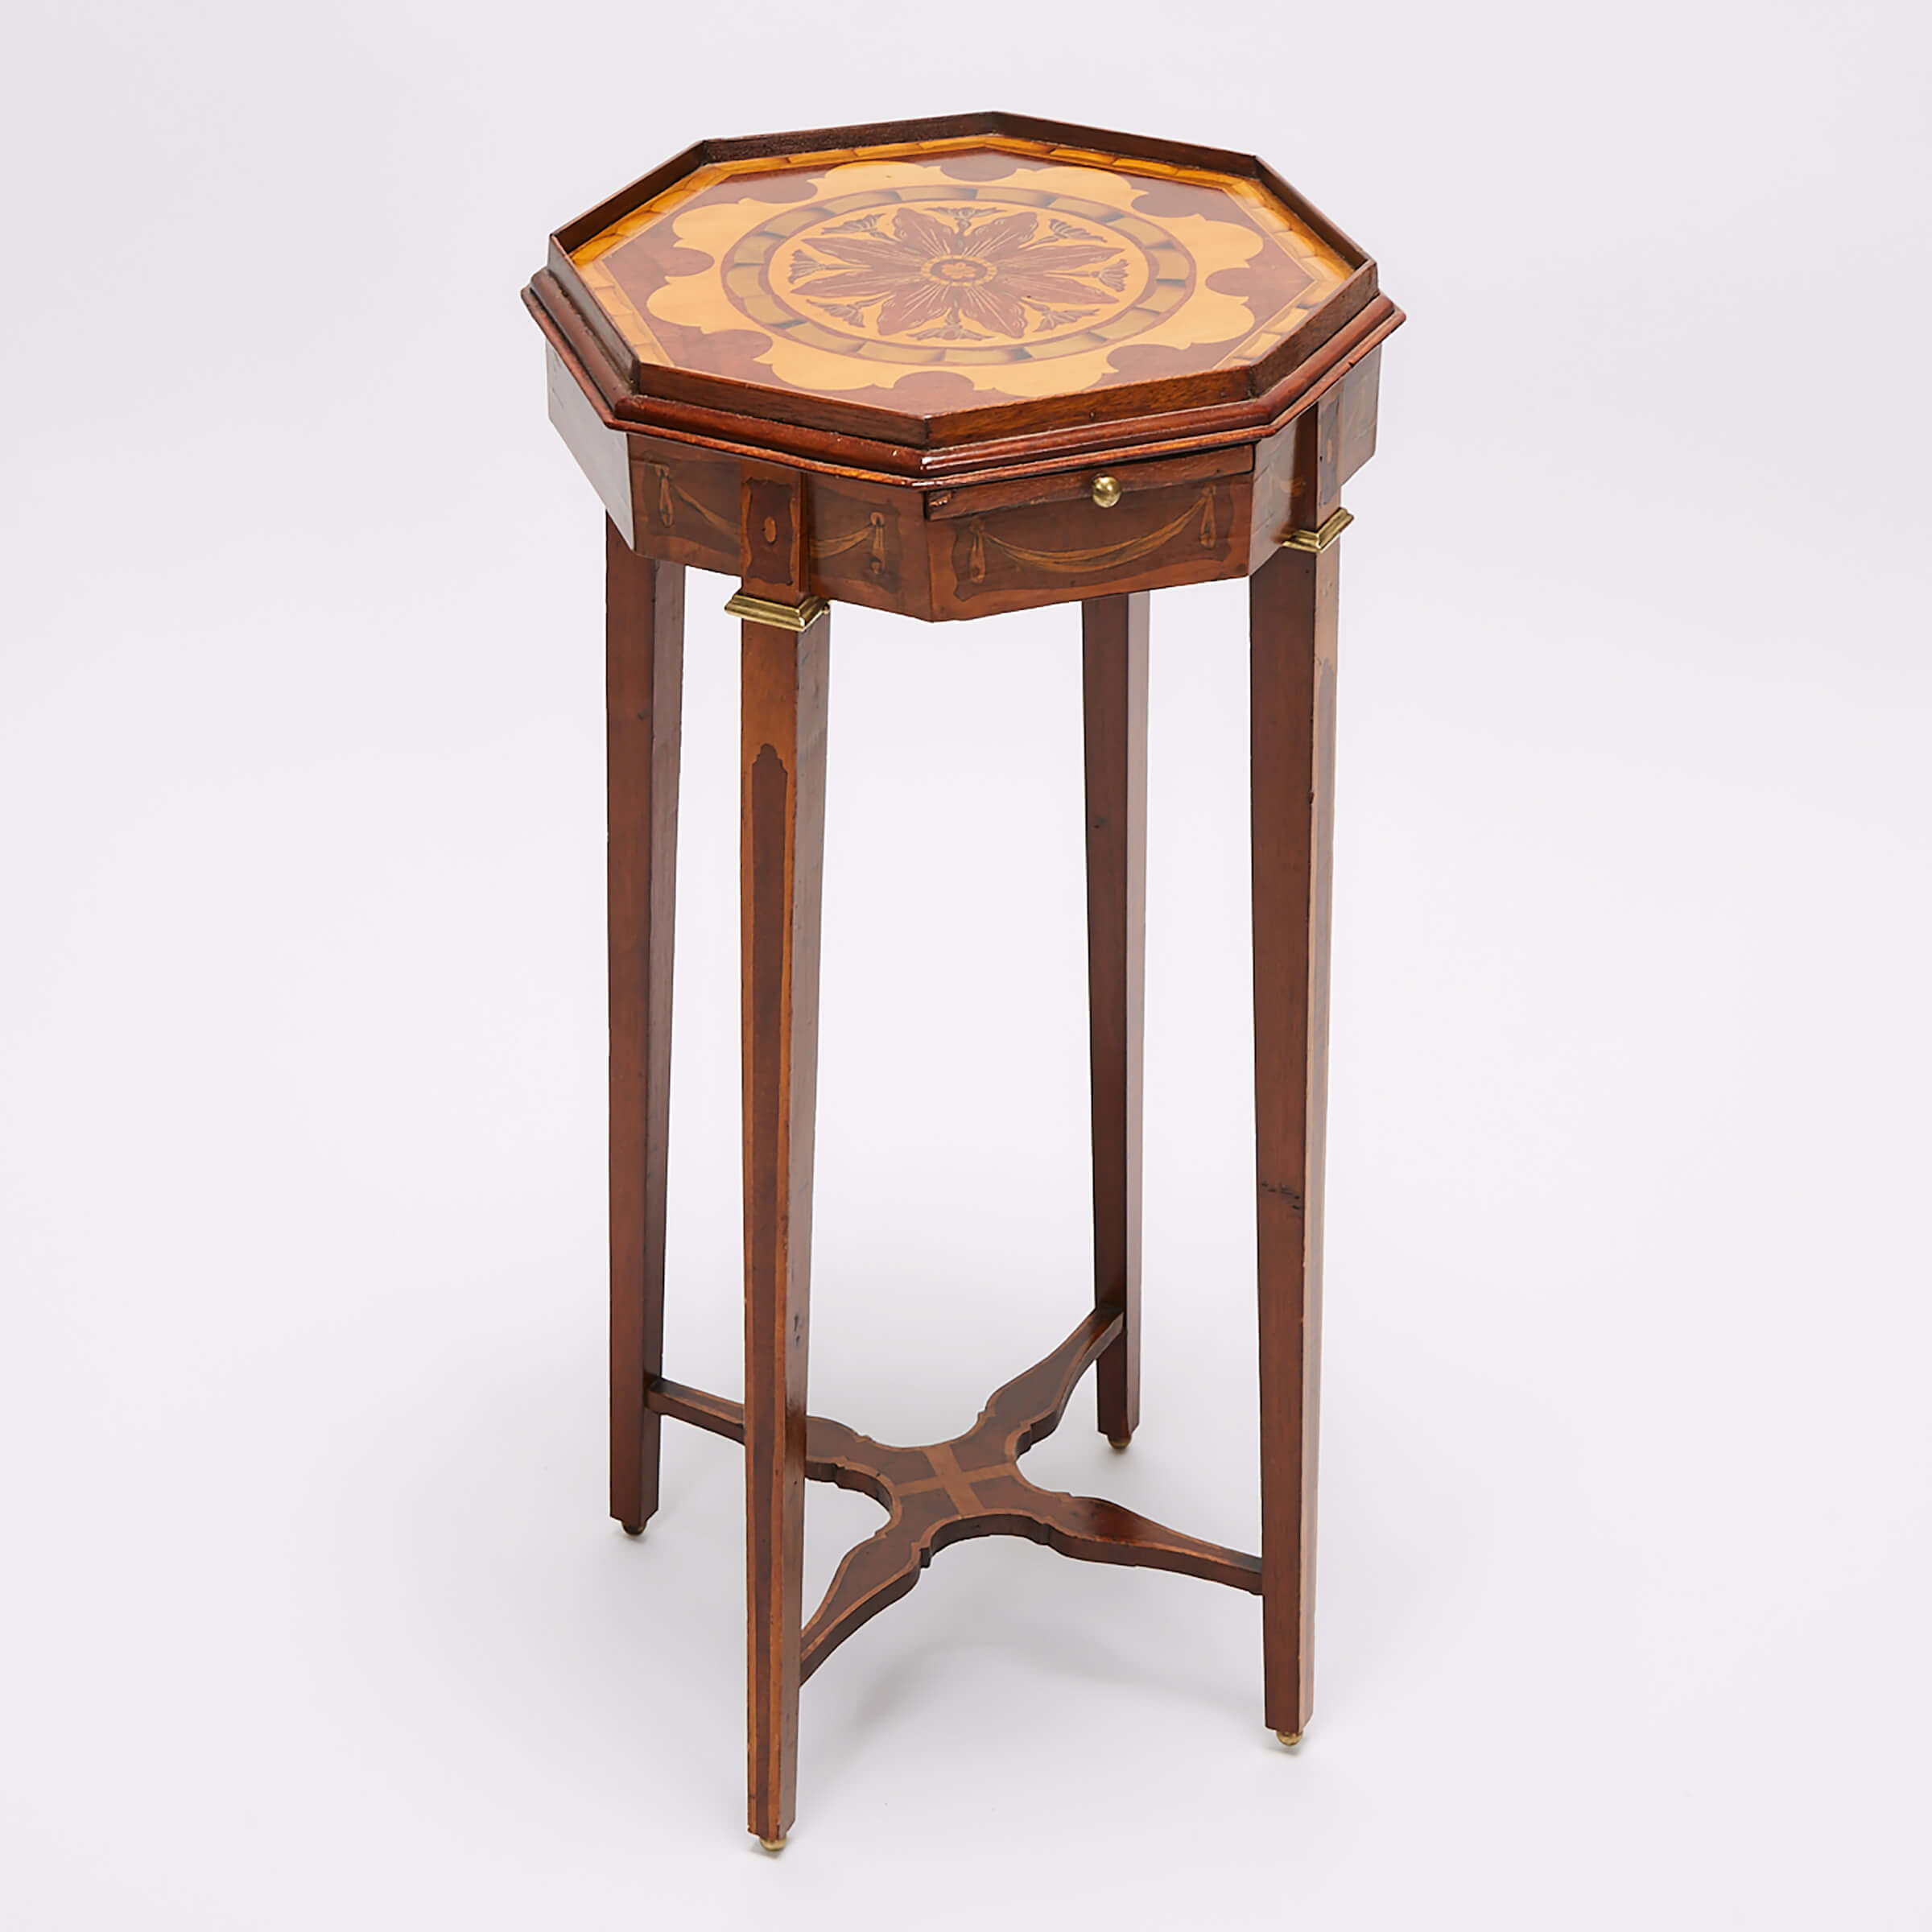 Neoclassical Ormolu Mounted Mixed Wood Inlaid Mahogany Candle Stand, 19th century